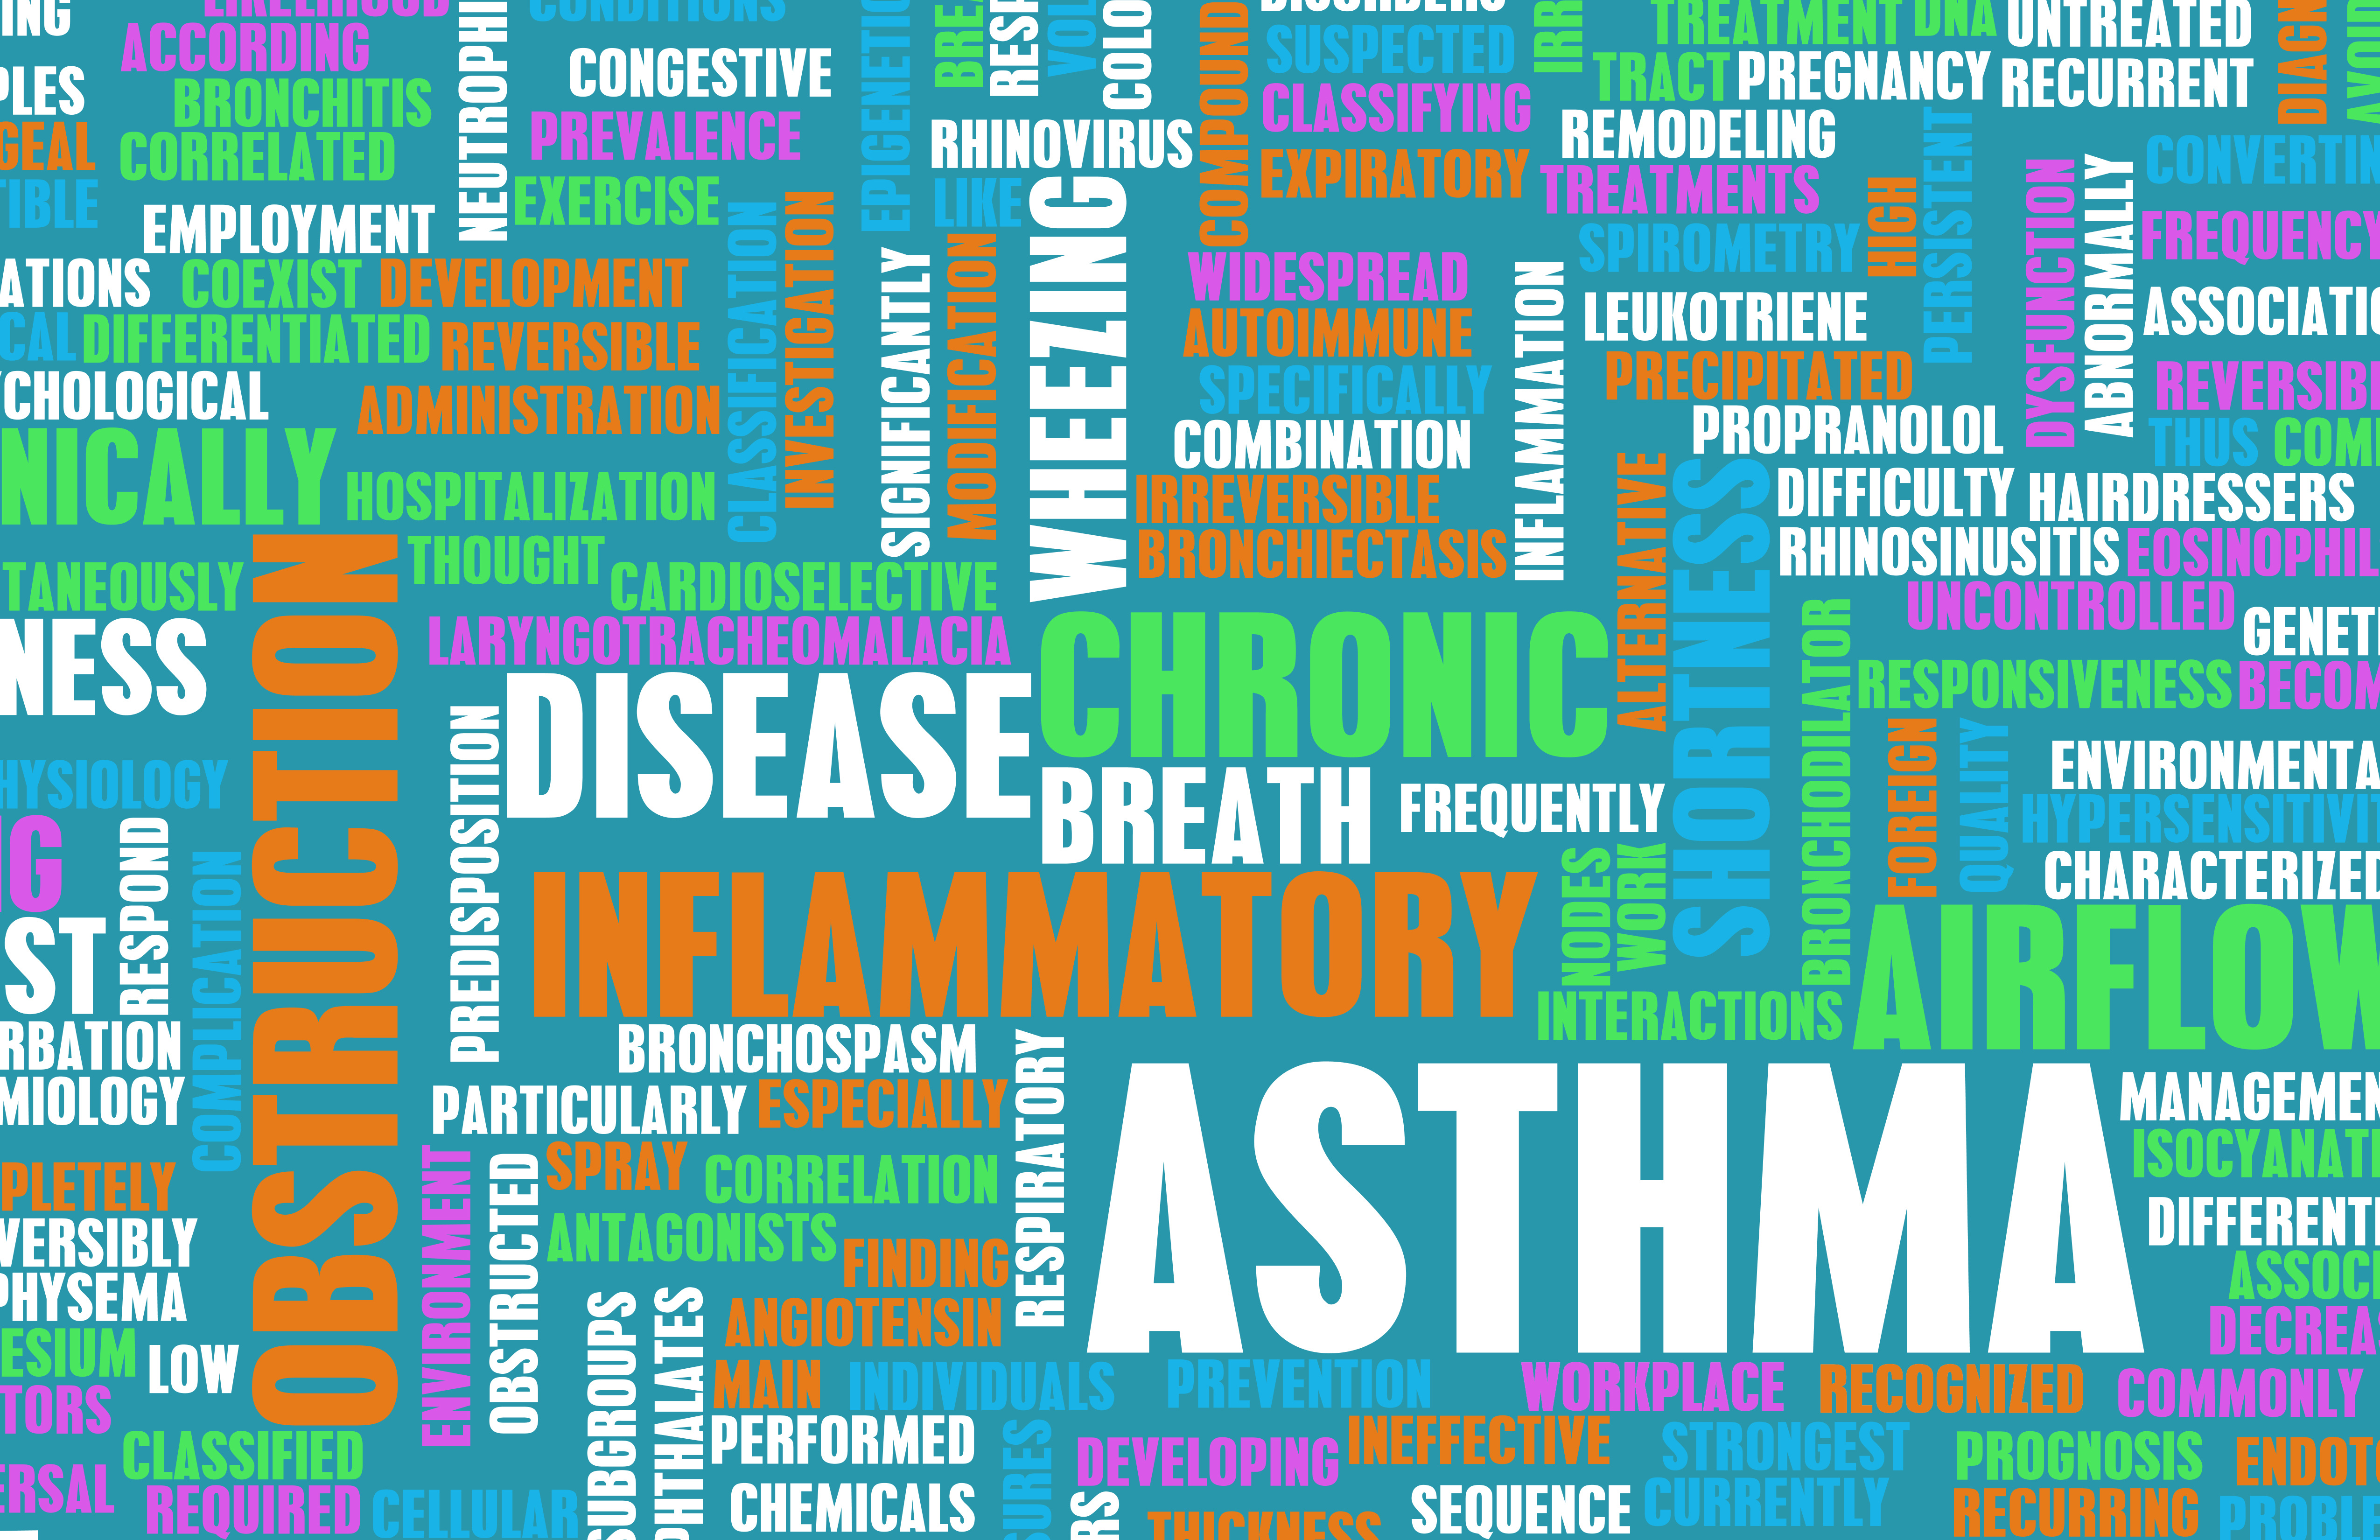 Asthma Respiratory Breathing Problem as a Concept